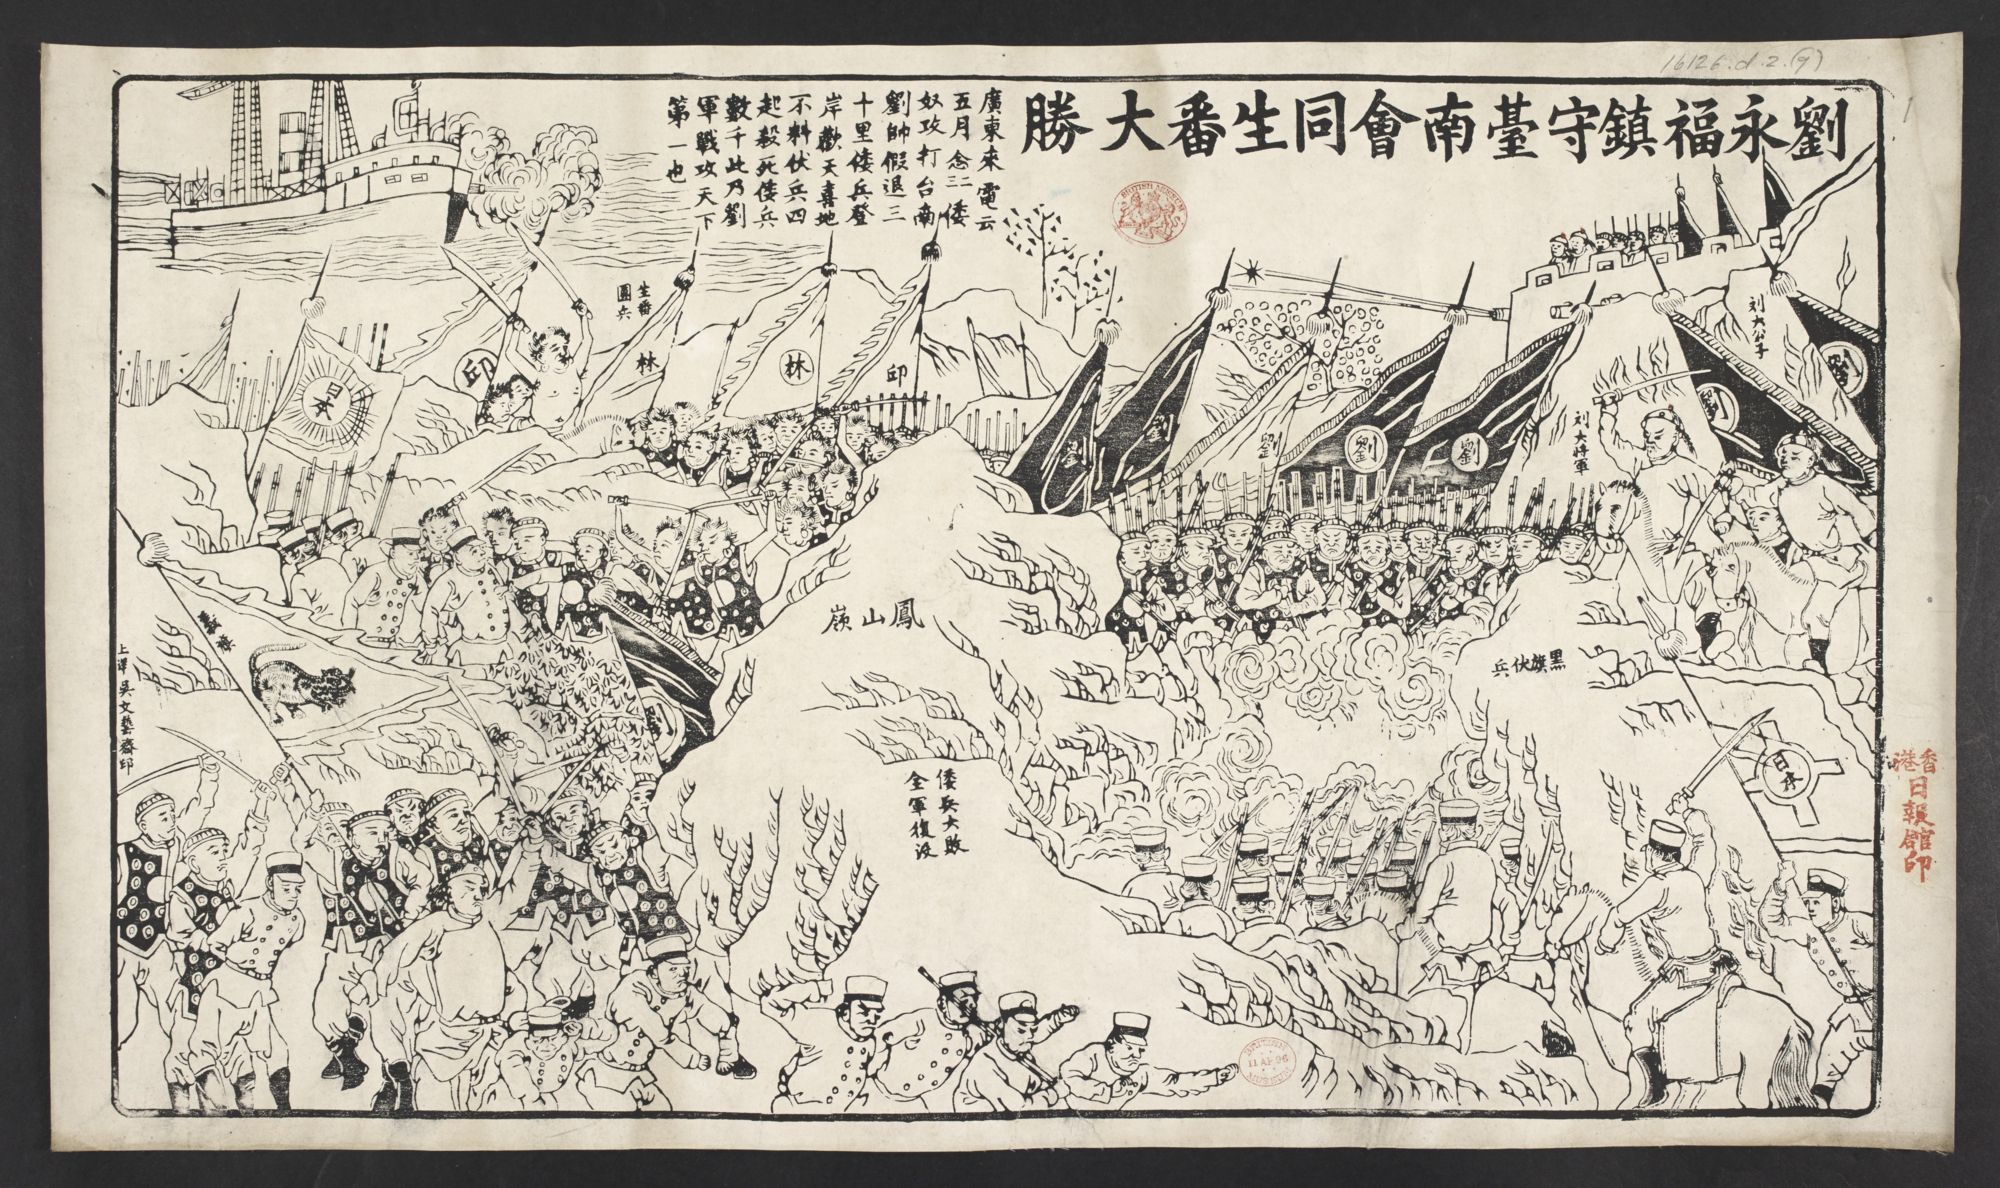 Liu Yongfu protects Tainan after the victory obtained together with the native people